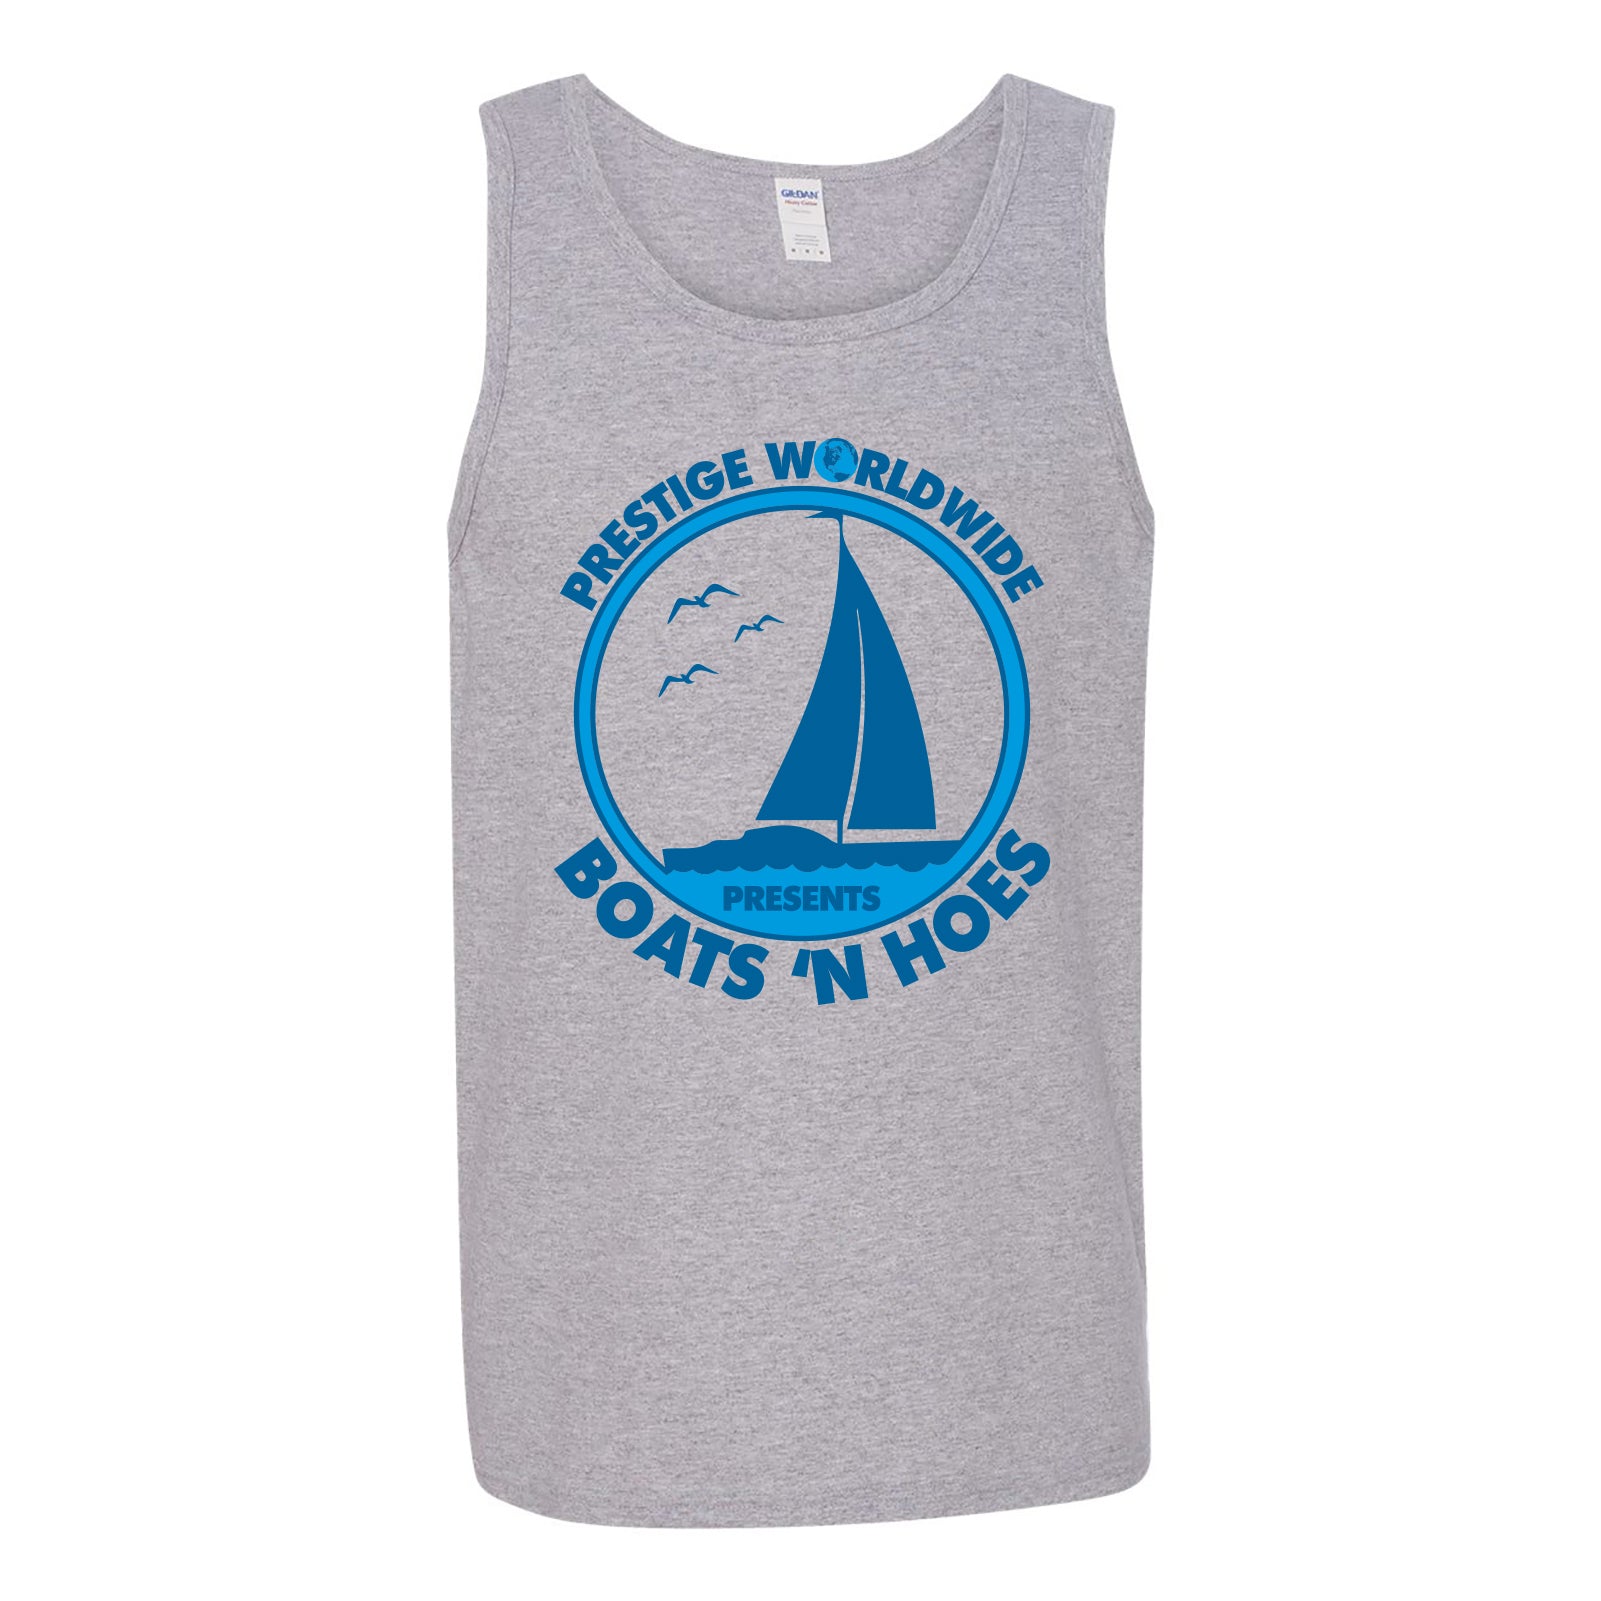 UGP Campus Apparel Prestige Worldwide Presents Boats 'n Hoes - Funny S –  Underground Online Retail